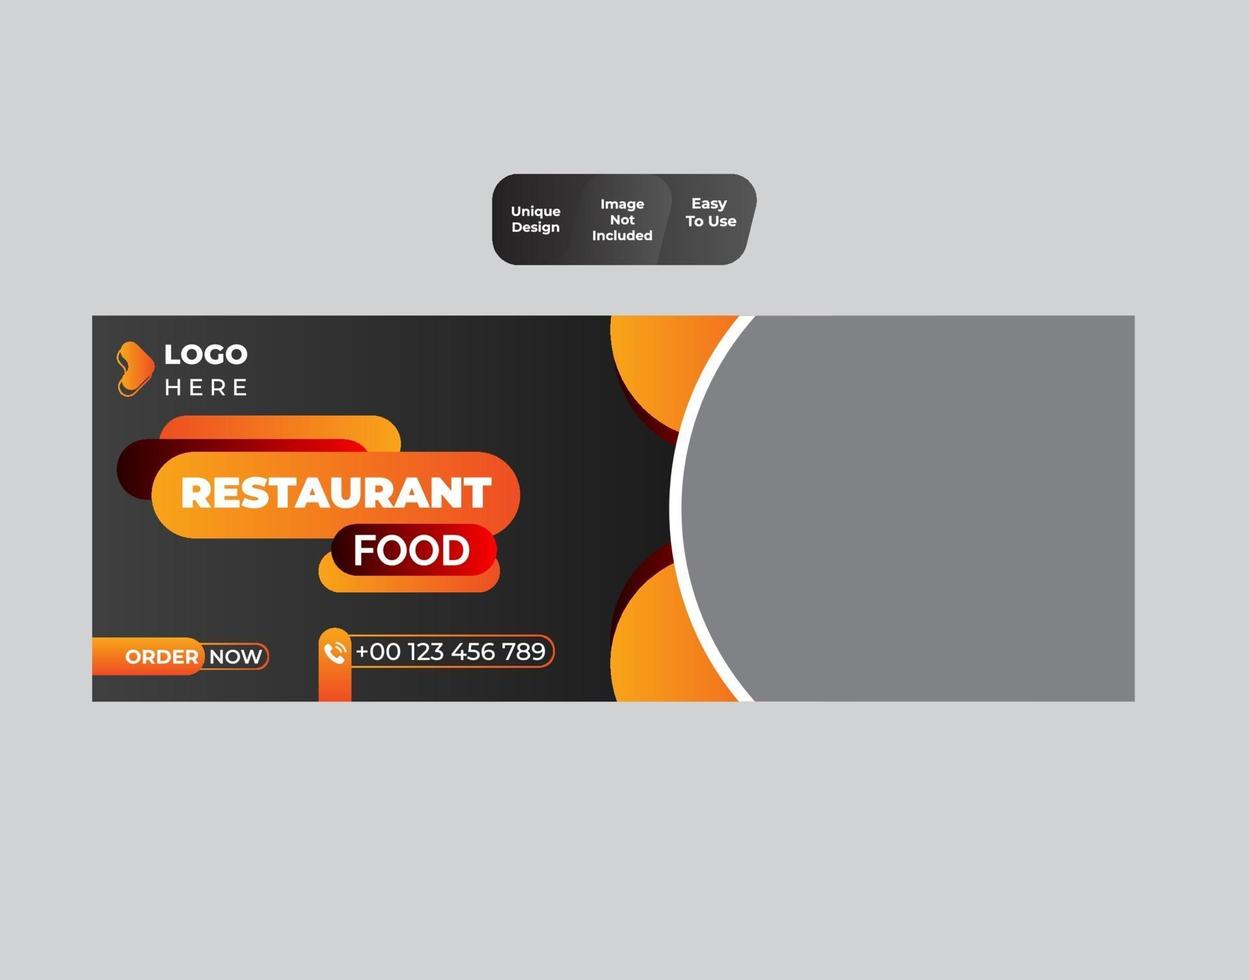 Food and Restaurant banner design template vector